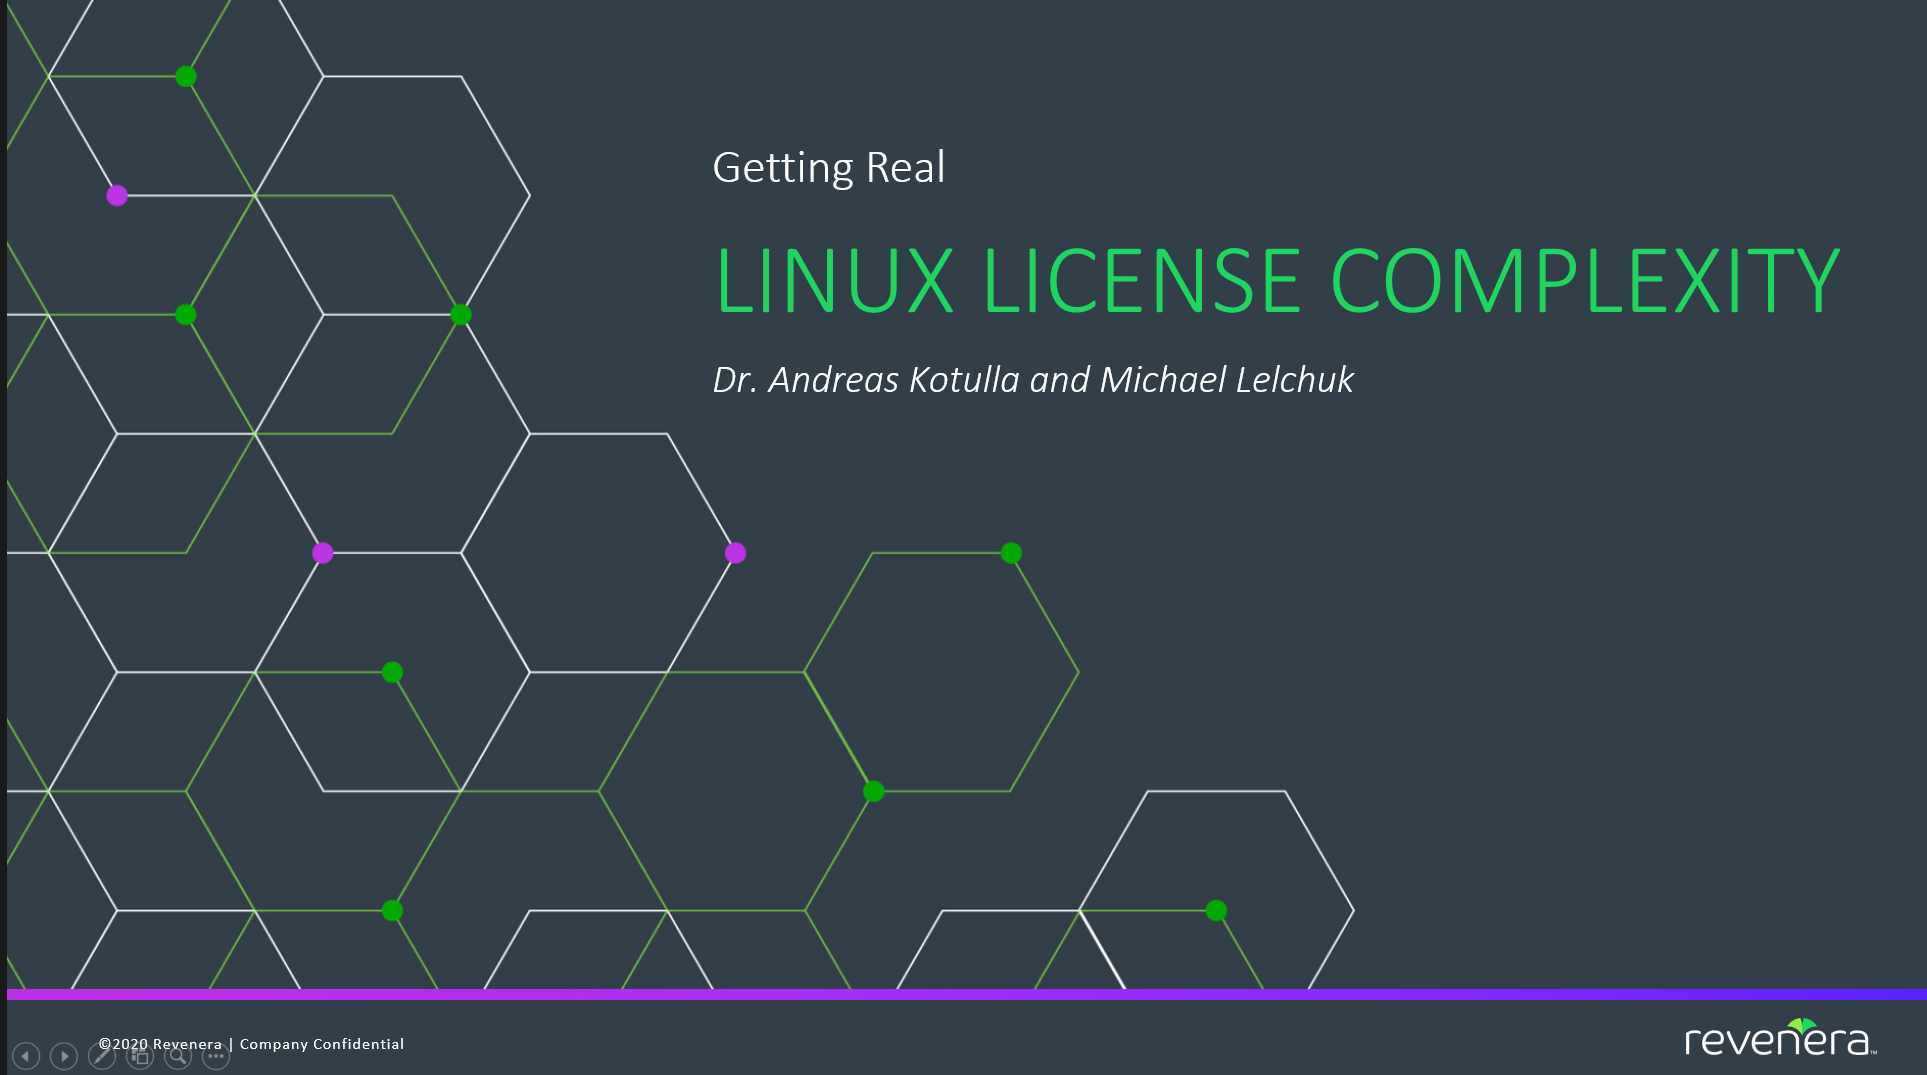 Getting Real: Linux License Complexity by Dr. Andreas Kotulla and Michael Lelchuk